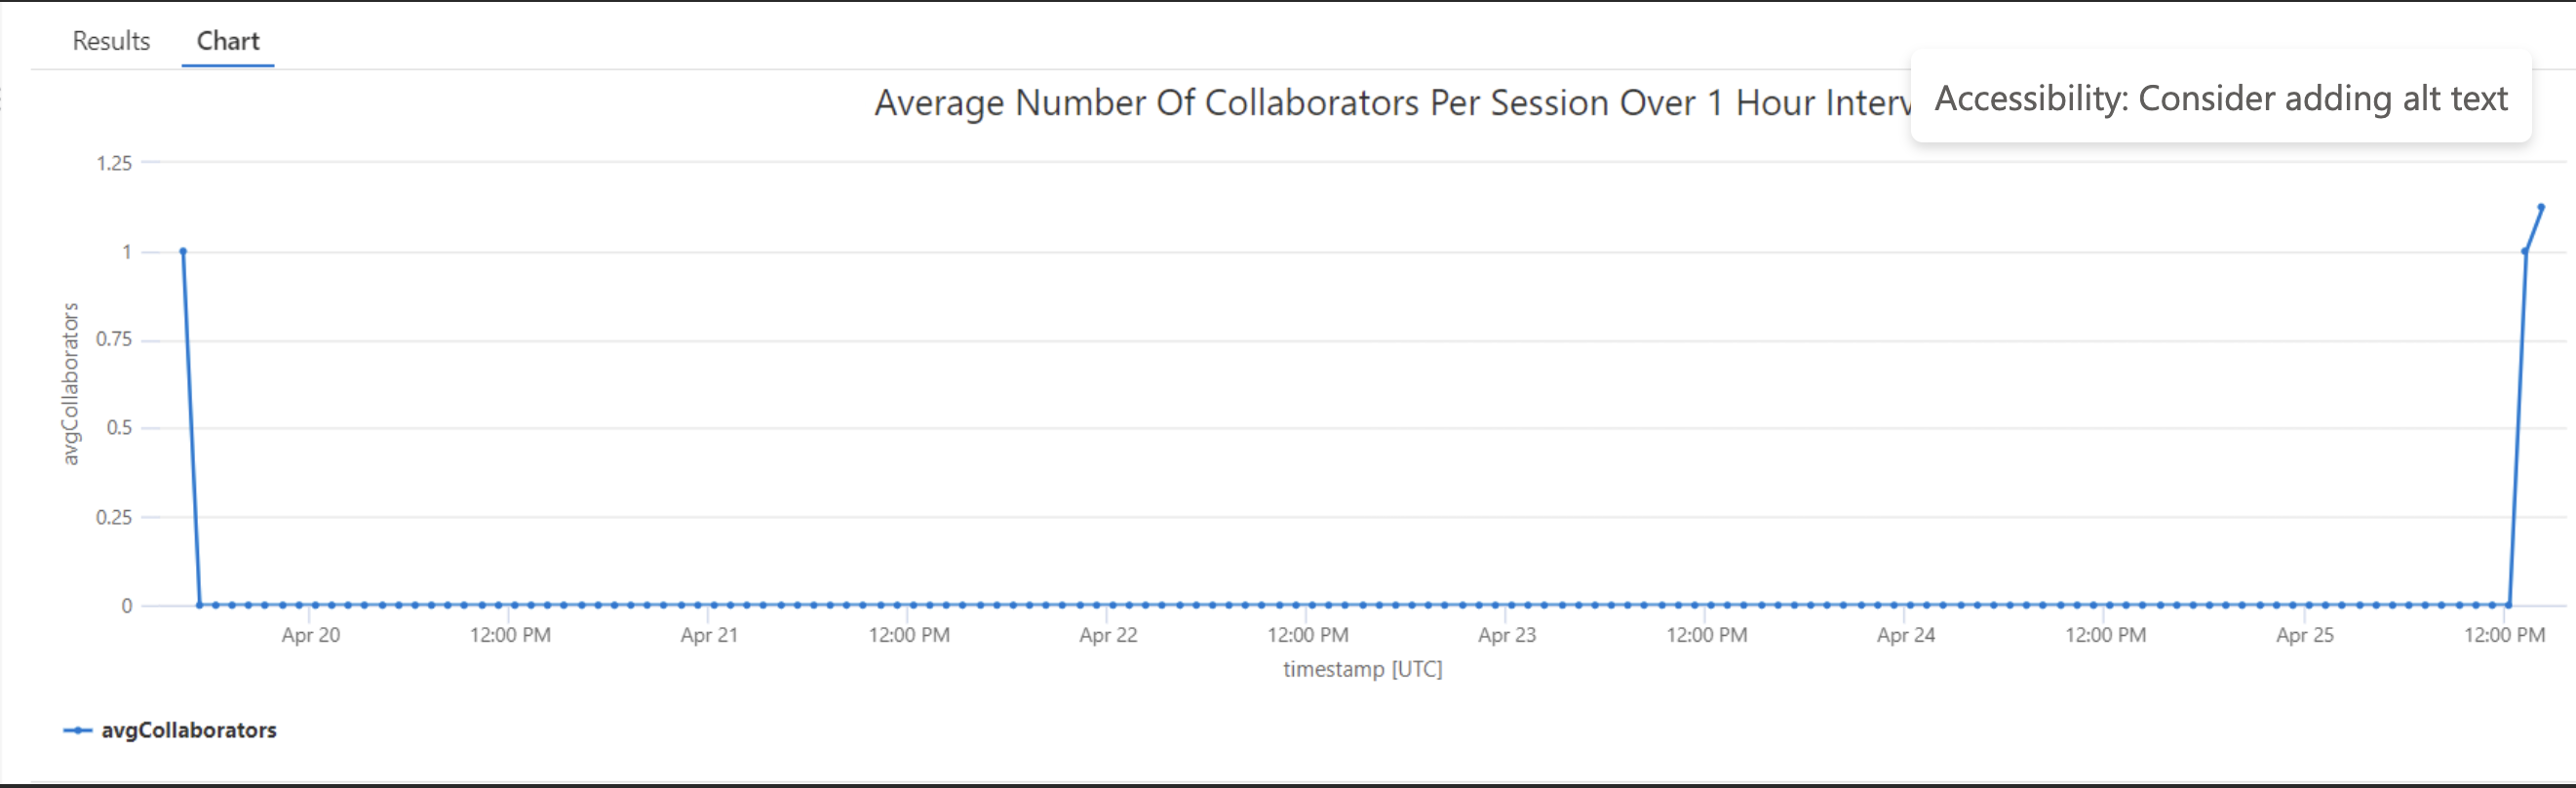 Average number of containers per session over time period